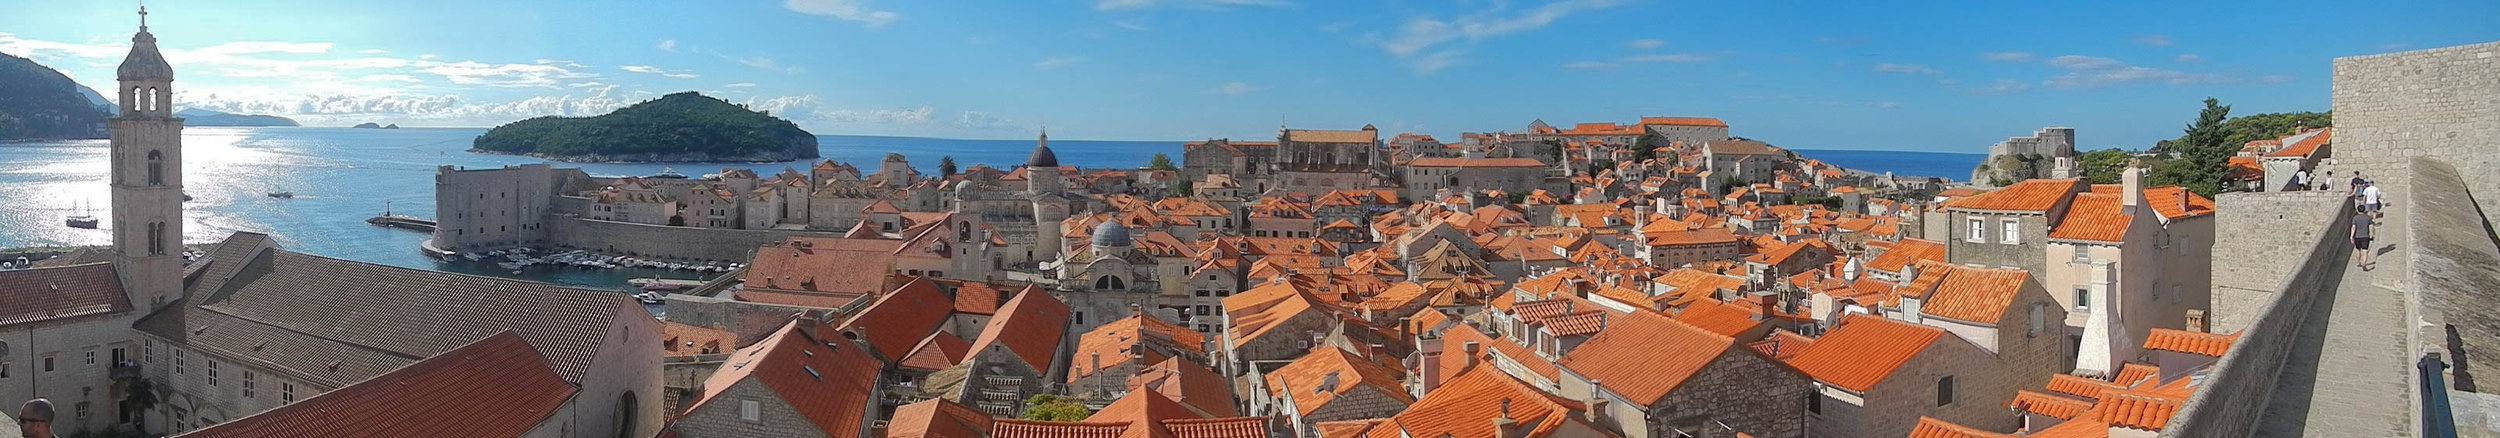 Panorama from town wall, Dubrovnik old town, Croatia